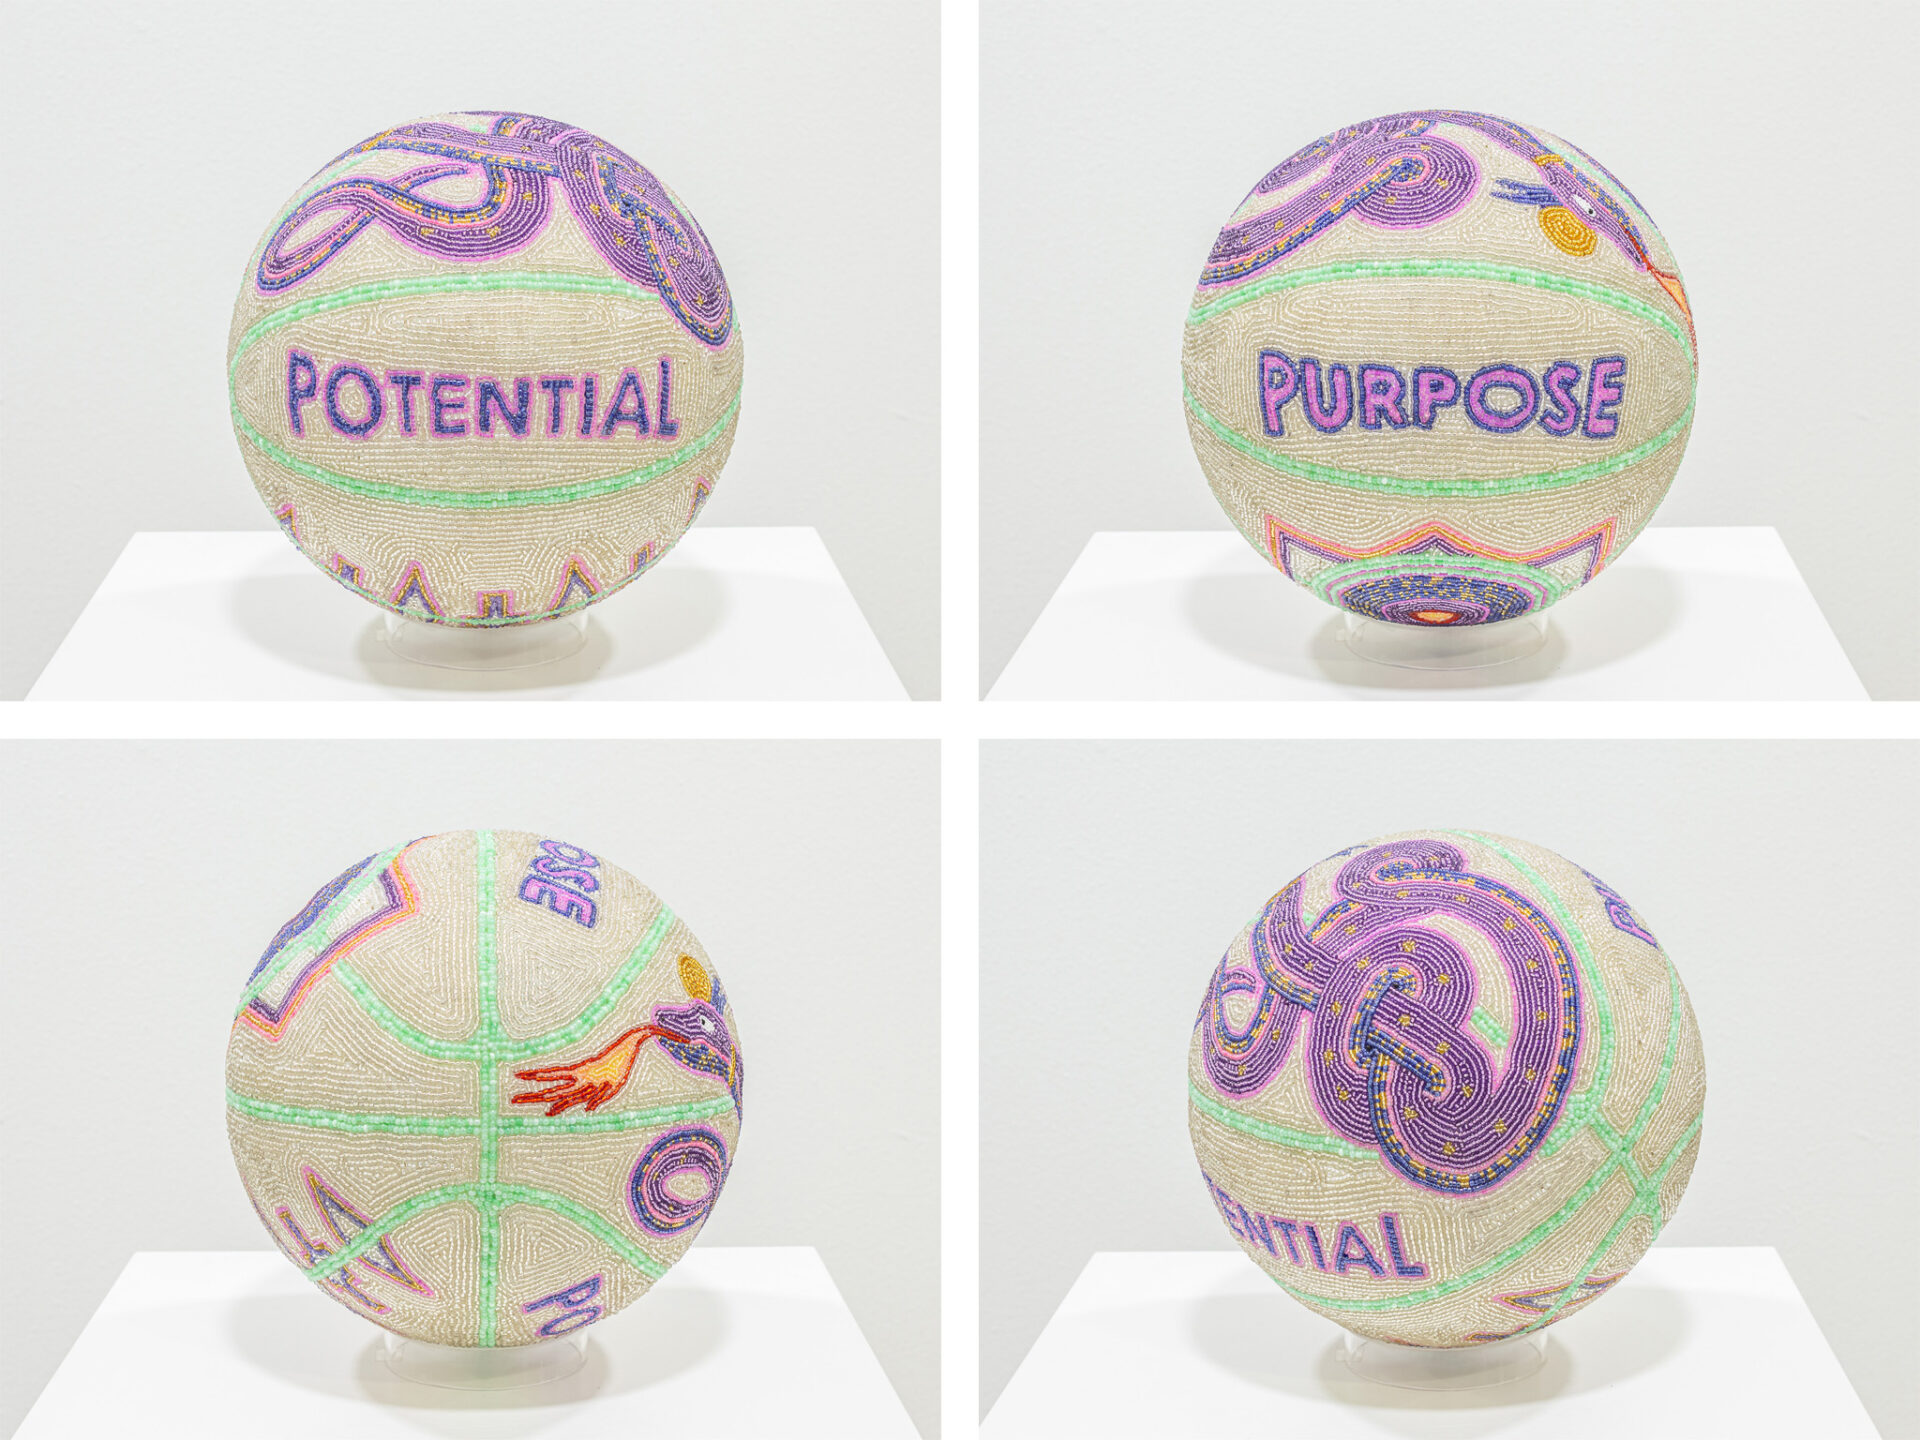 a four-up image of different views of a teal glass bead-coated spherical sculpture made from a basketball depicting the words "potential" and "purpose" and a fire-breathing snake